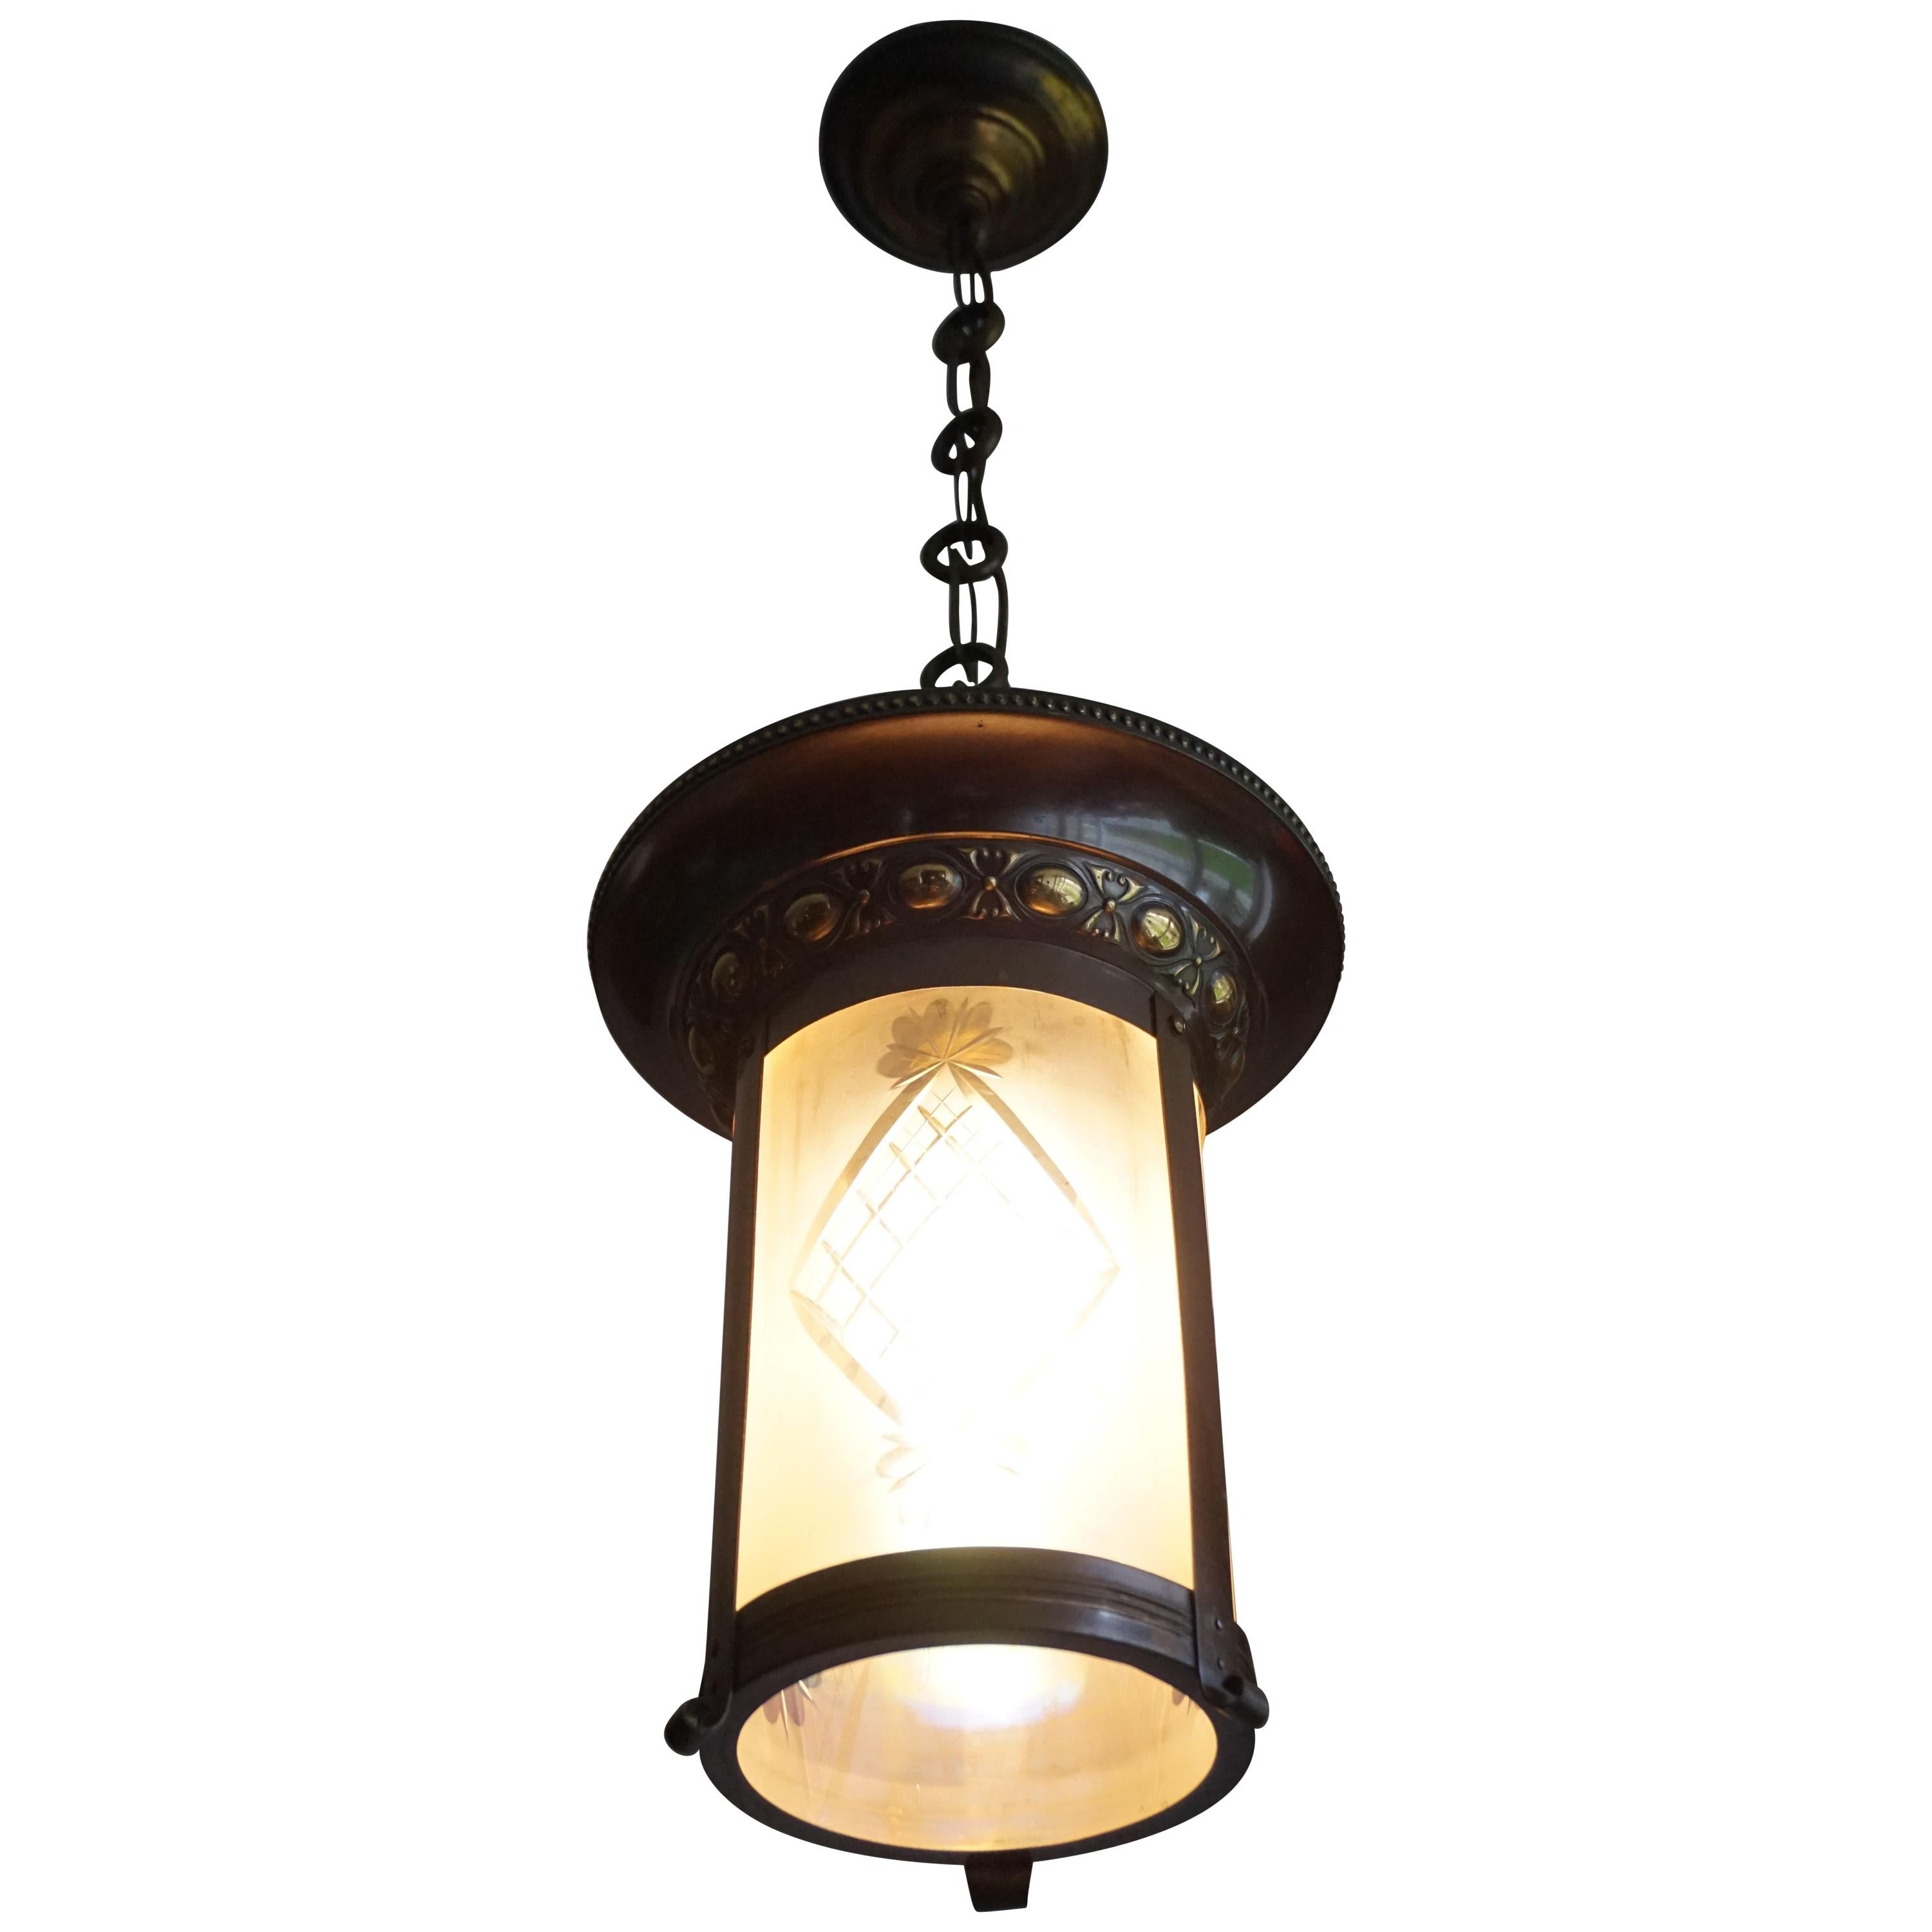 Stunning Two-Tone Brass with Hand Engraved Glass Arts & Crafts Pendant Light